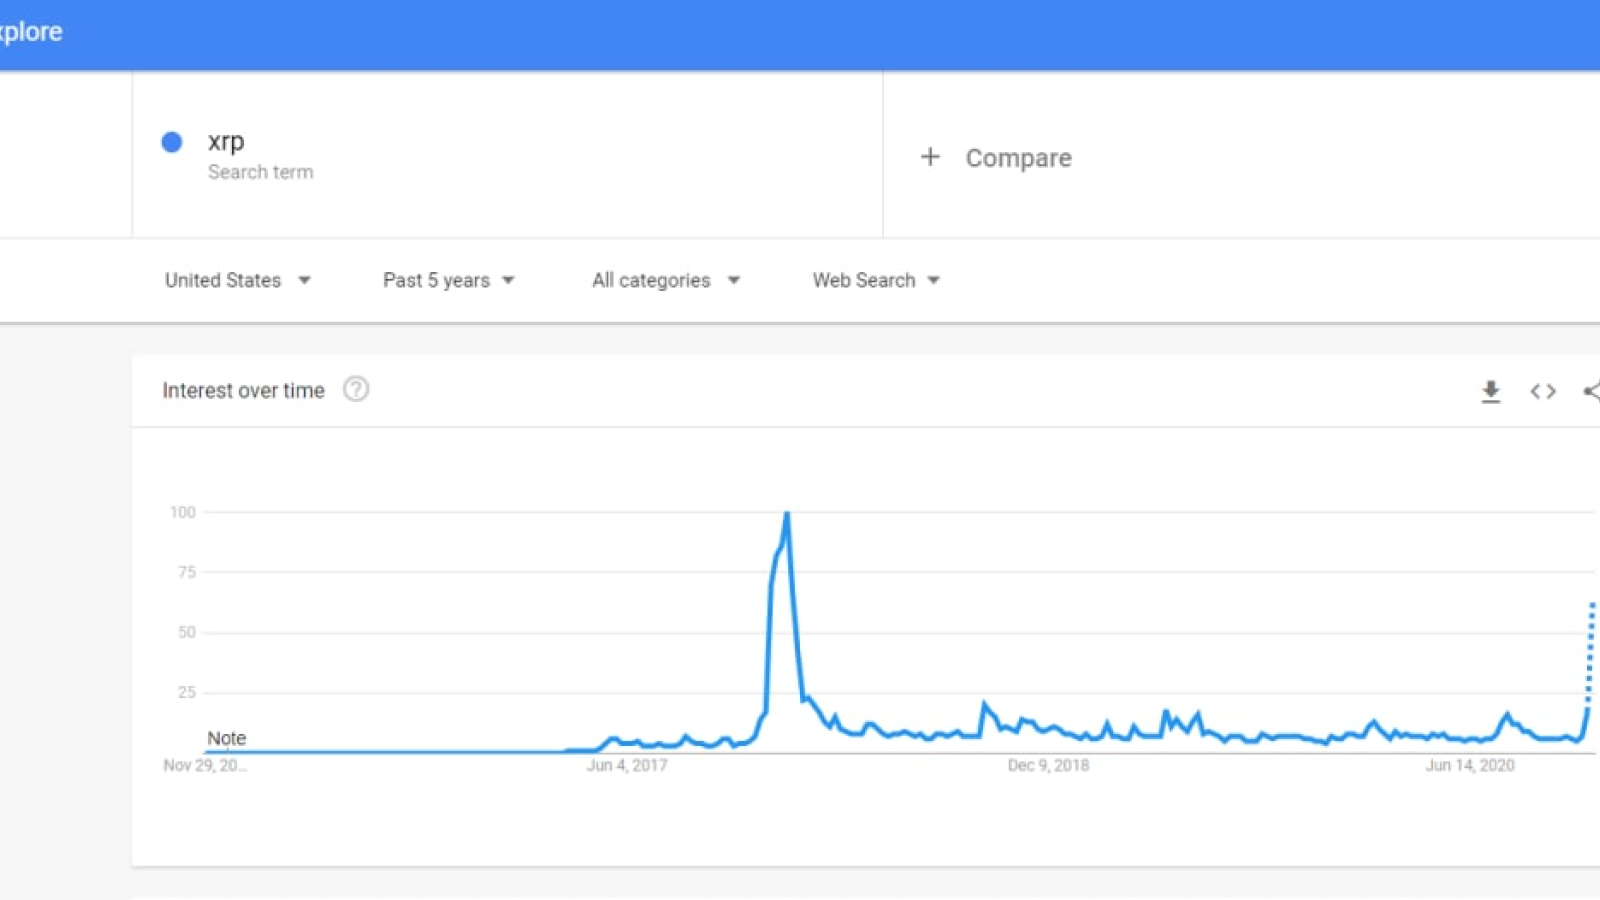 The popularity of XRP on Google Trends. Source: Google Trends